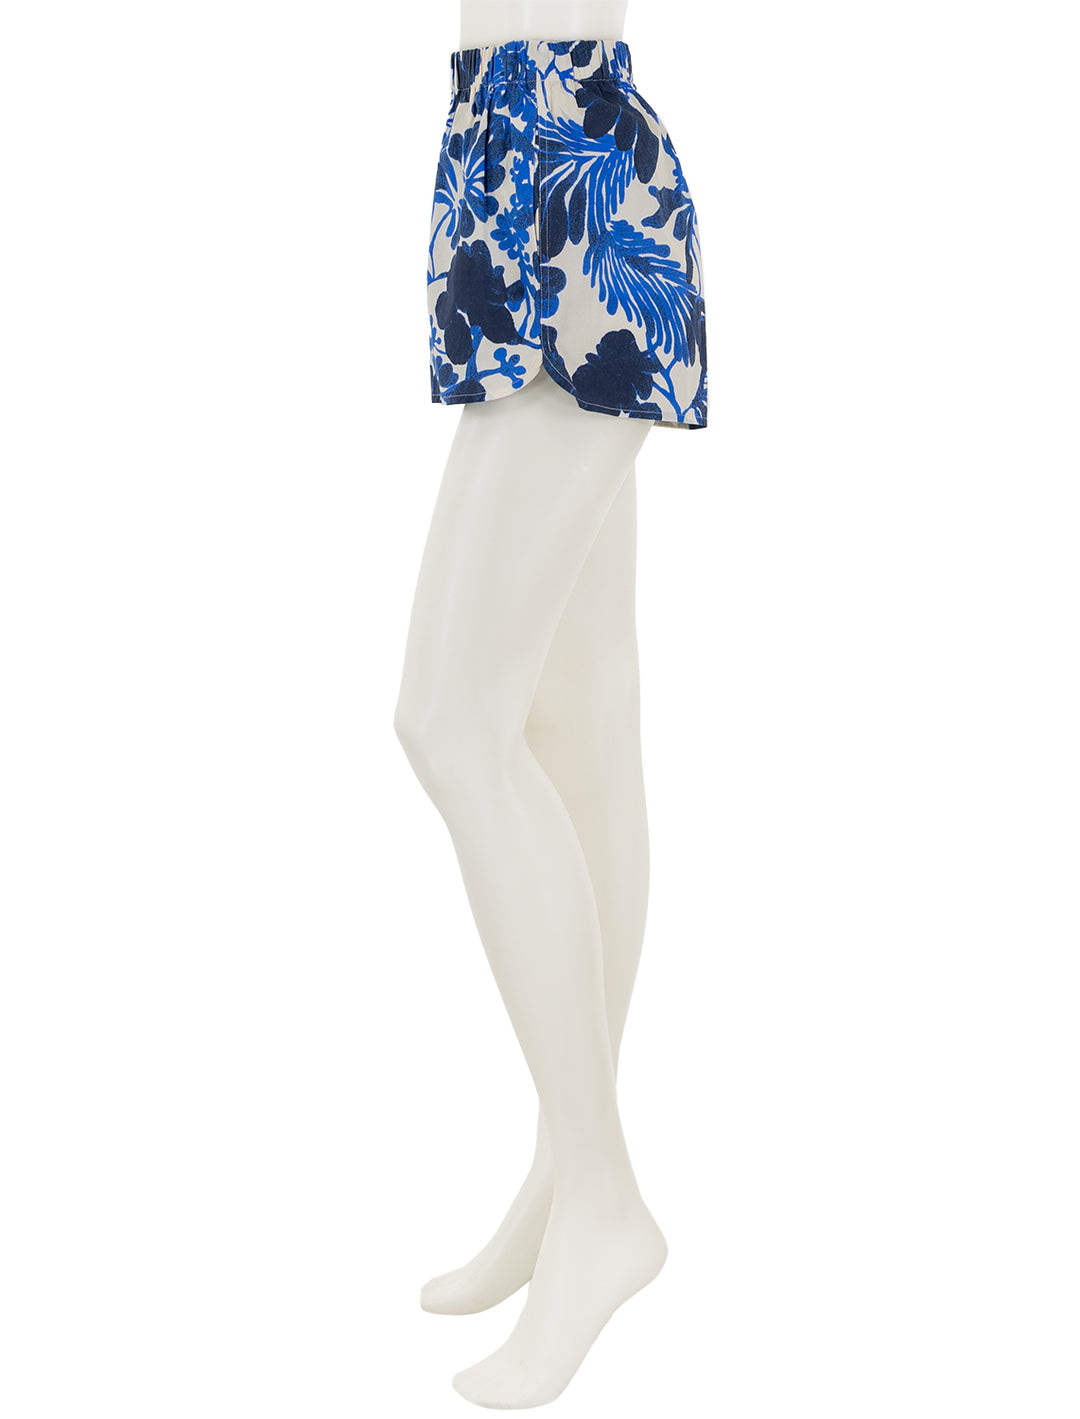 Side view of Cara Cara's brooks shorts in evening mill reef print.